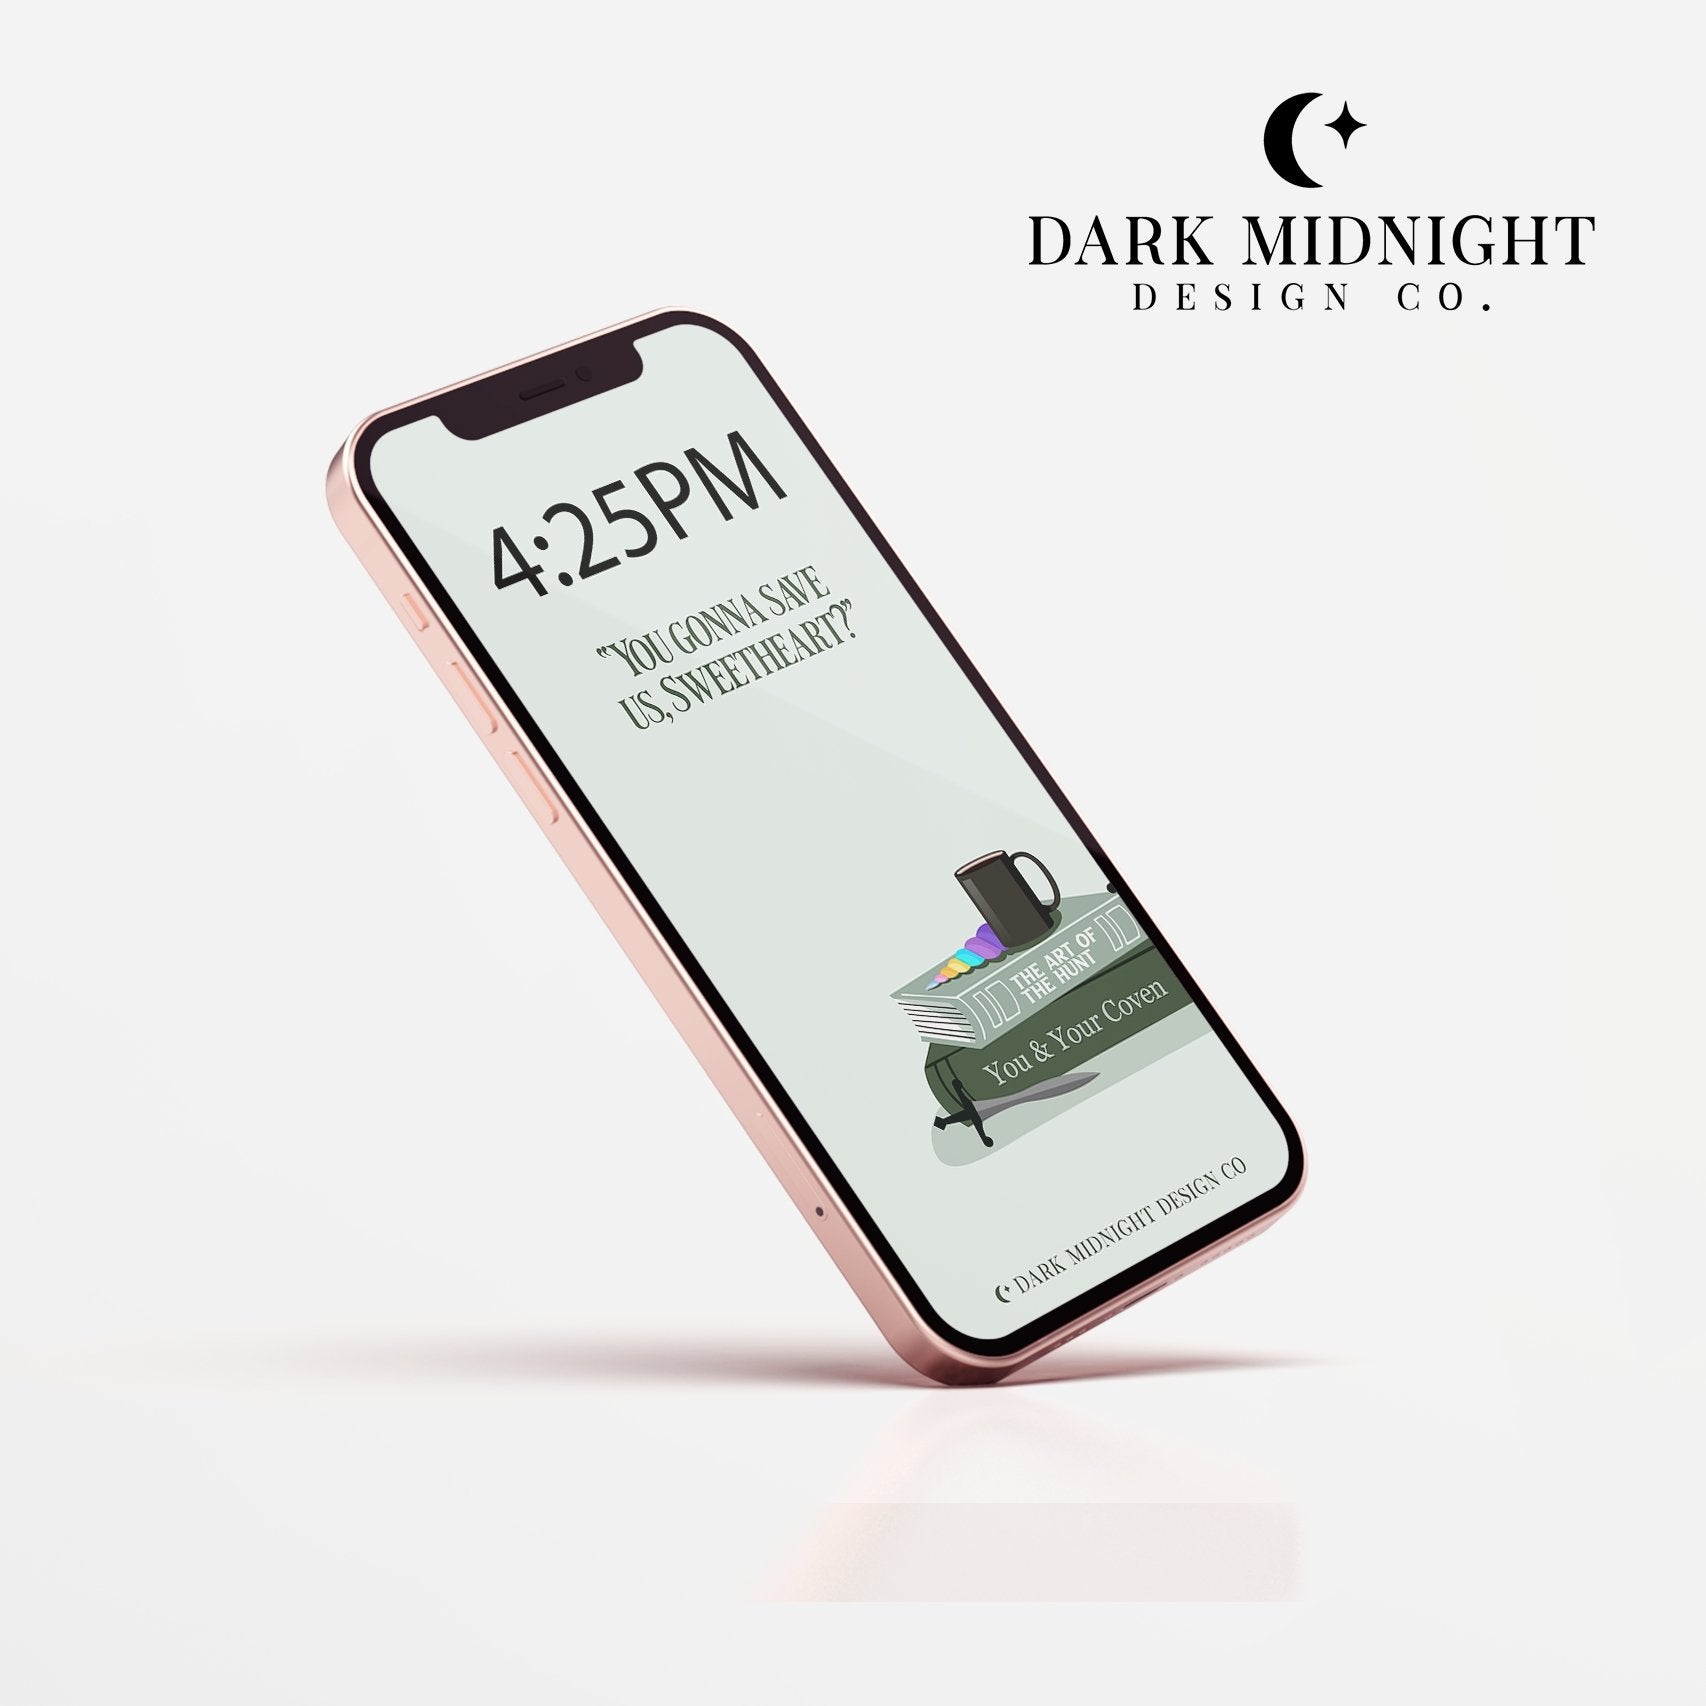 Character Anthology Phone Wallpaper - Caleb Altair - Officially Licensed Zodiac Academy Phone Wallpaper - Dark Midnight Design Co